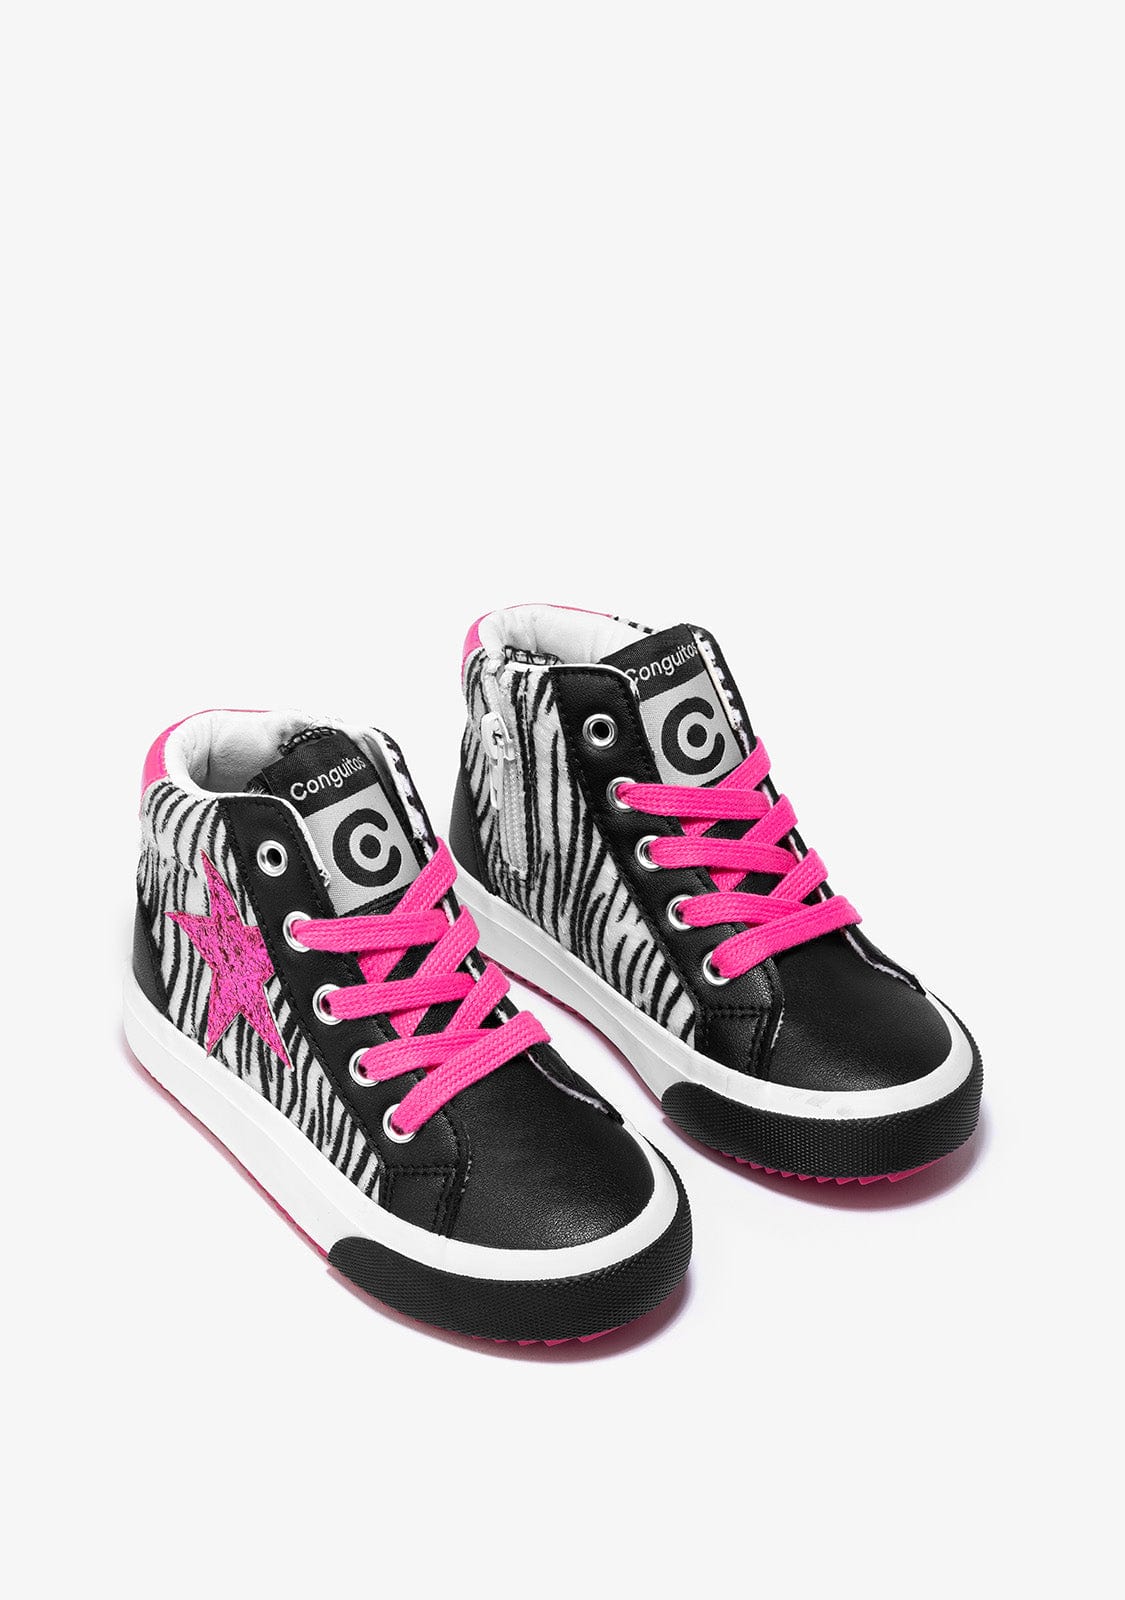 CONGUITOS Shoes Girl's Black Star Hi-Top Sneakers